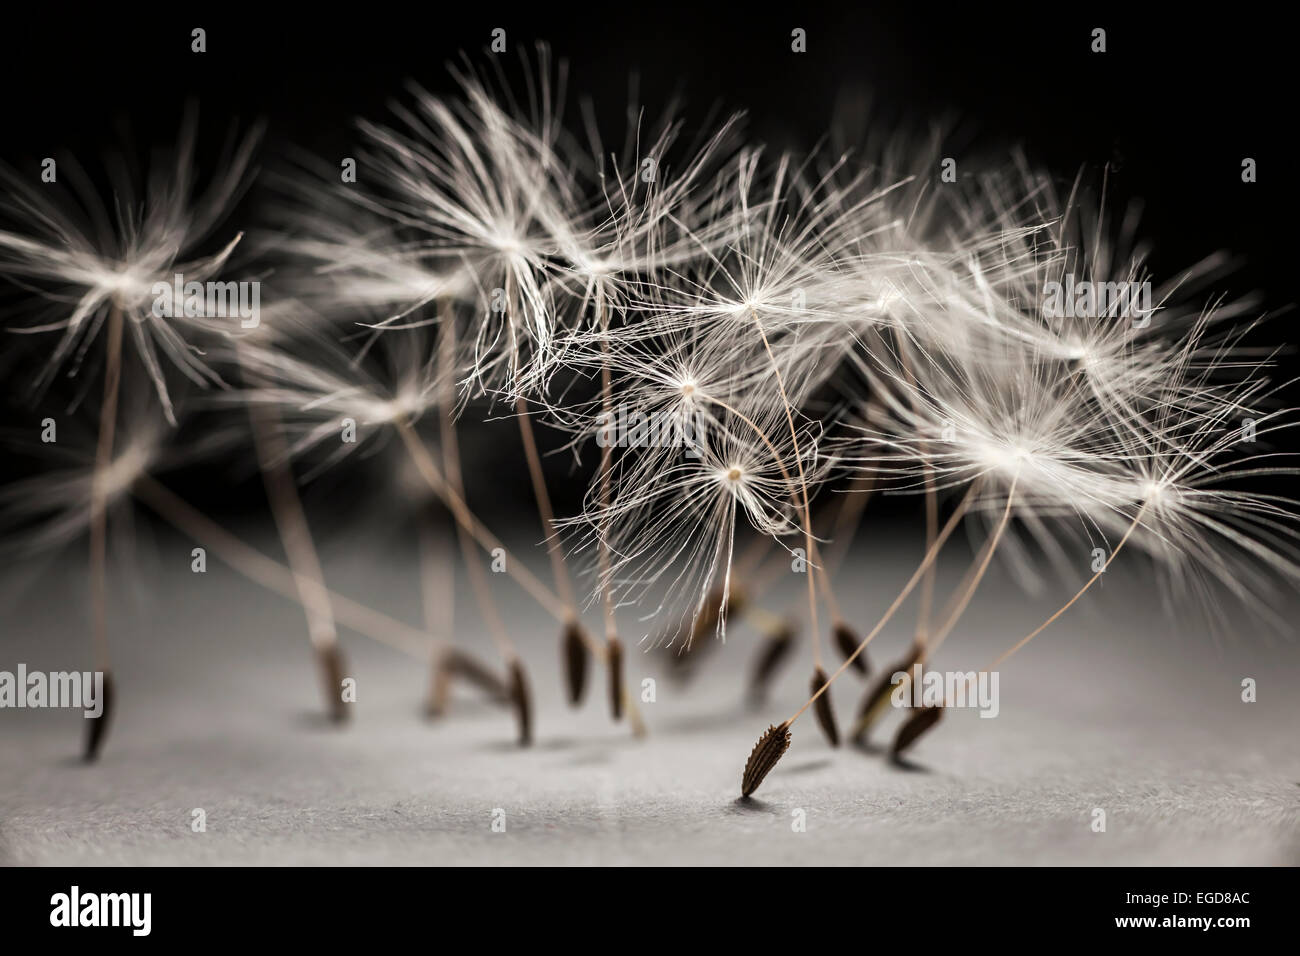 Macro closeup of dandelion seeds standing up on gray and black background Stock Photo